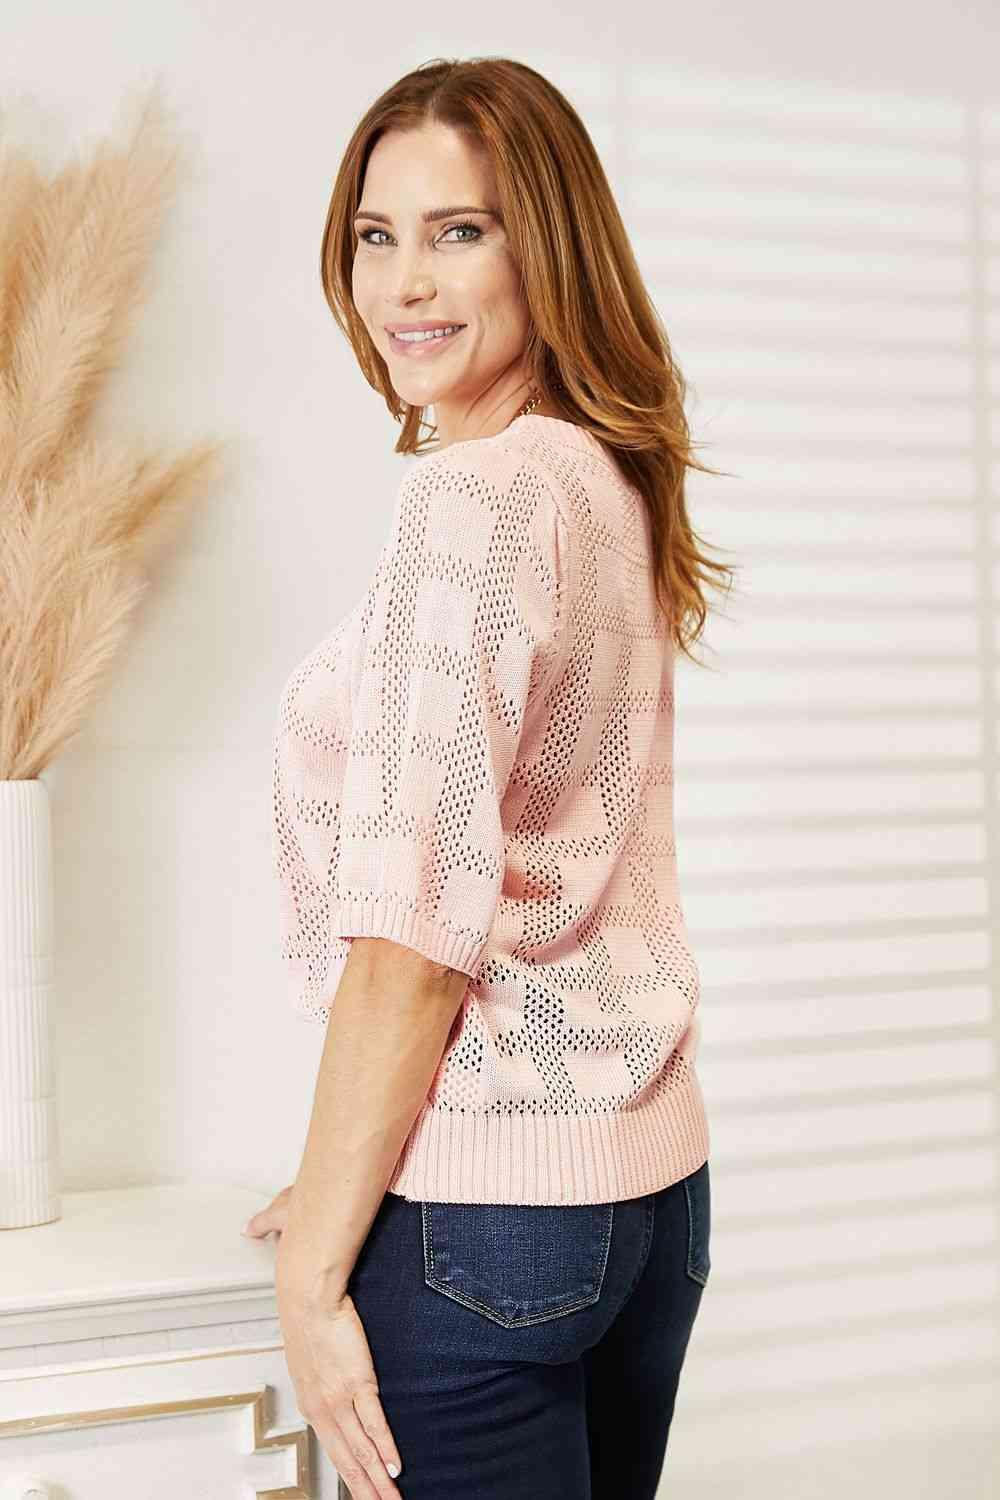 Women's Shirts Double Take Ribbed Trim Round Neck Knit Top